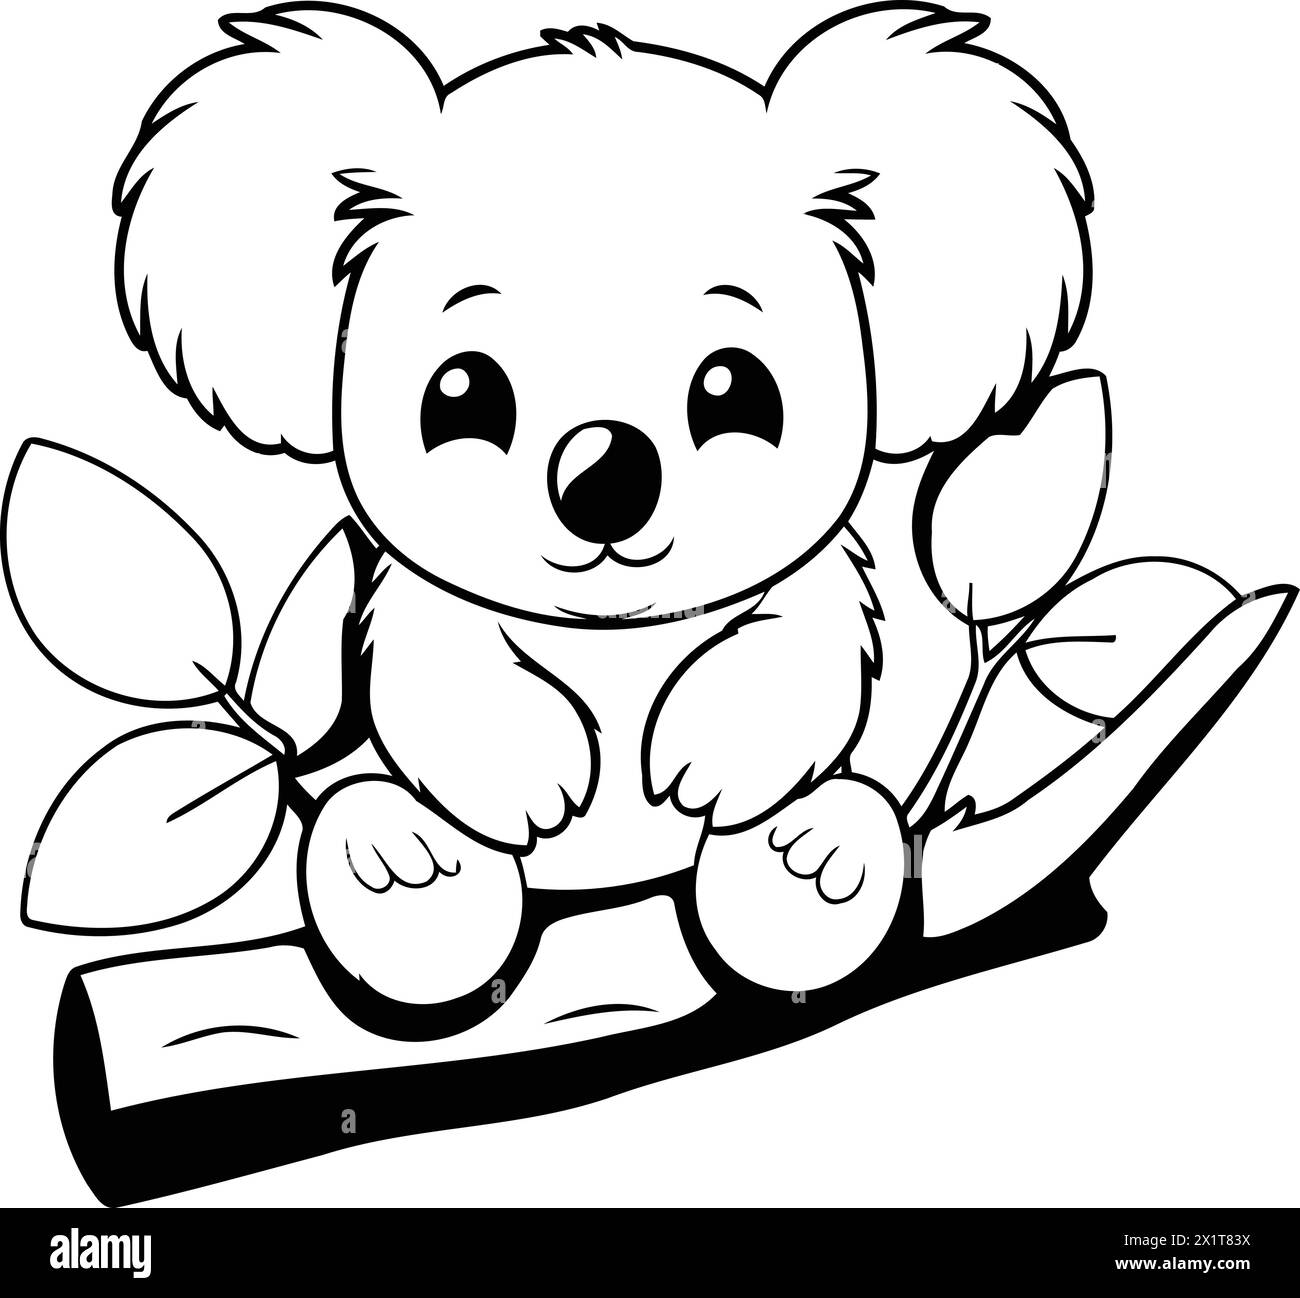 Cute koala sitting on a branch with leaves. Vector illustration. Stock Vector